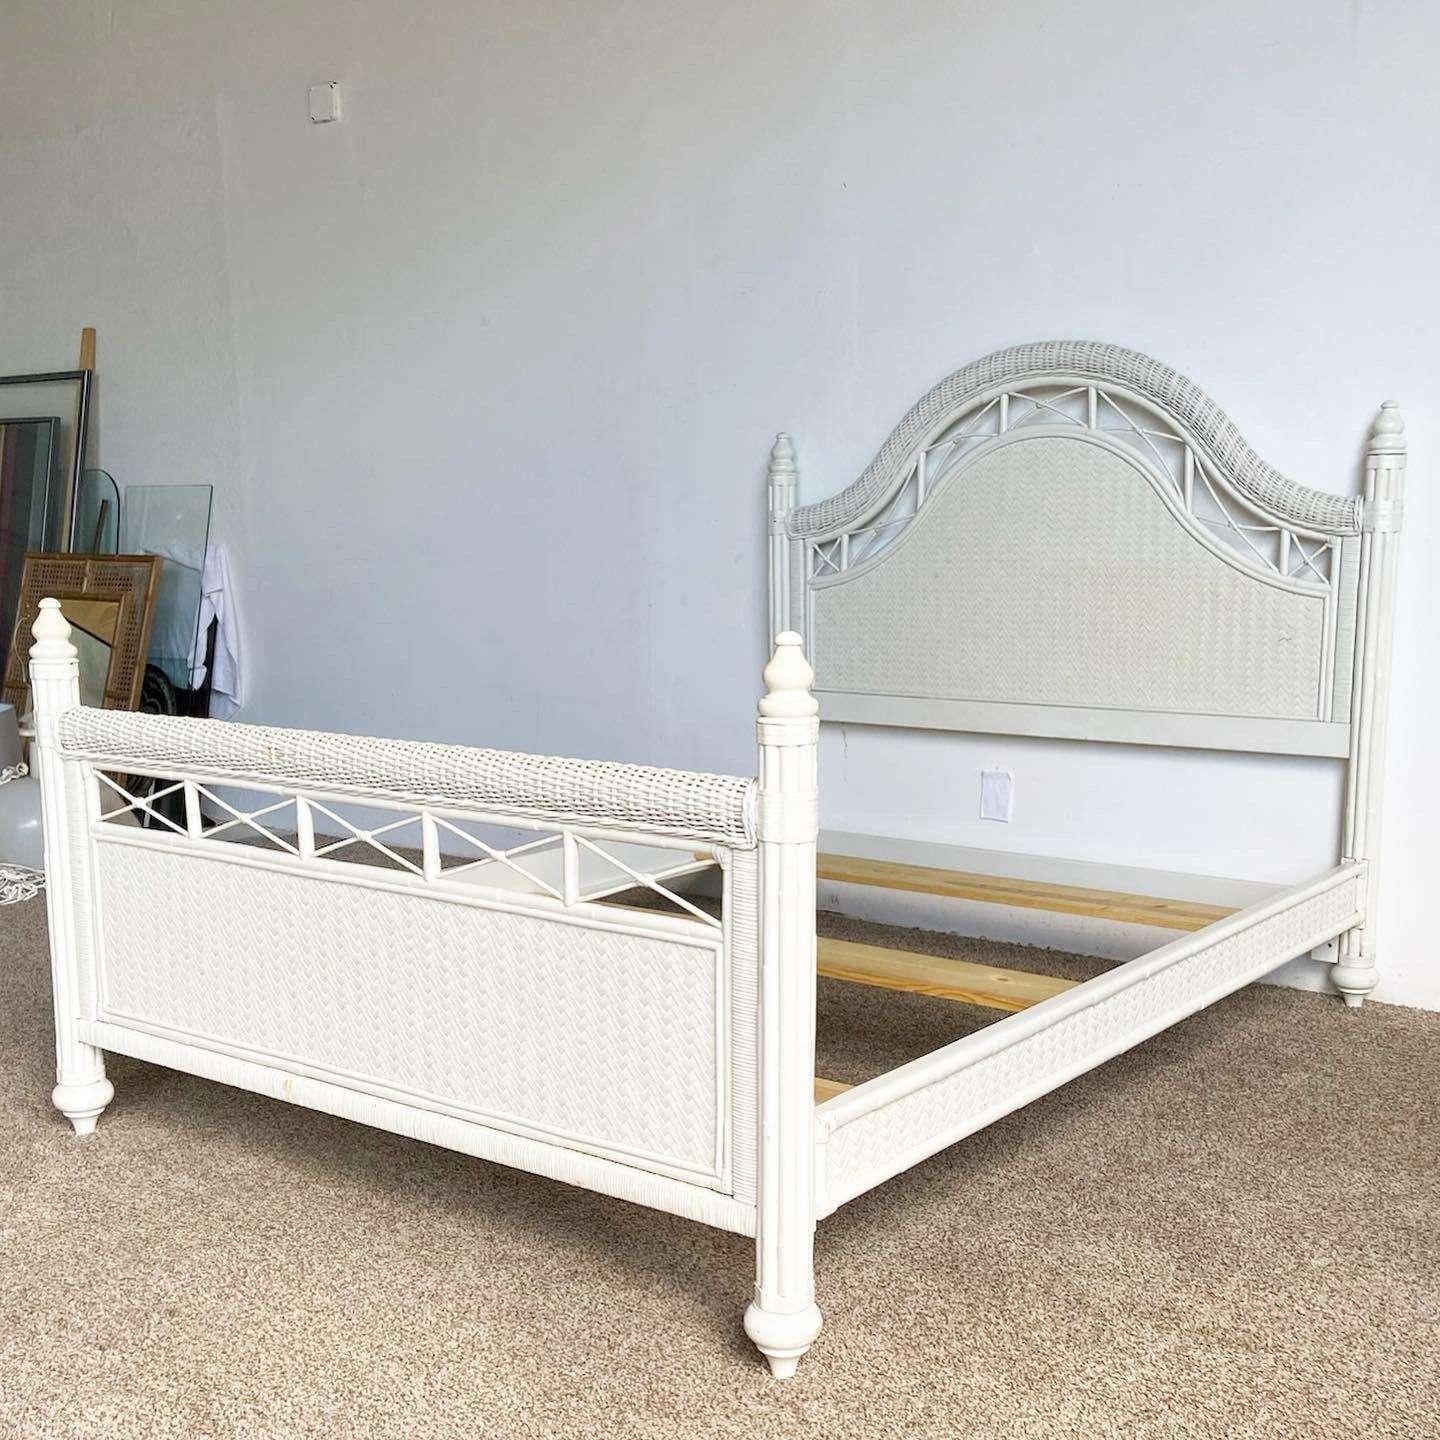 Exceptional vintage boho chic queen size bed frame with headboard, side rails and foot board. Constructed with bamboo rattan and herringbone weaving through the surfaces.

Footboard measures 38”H